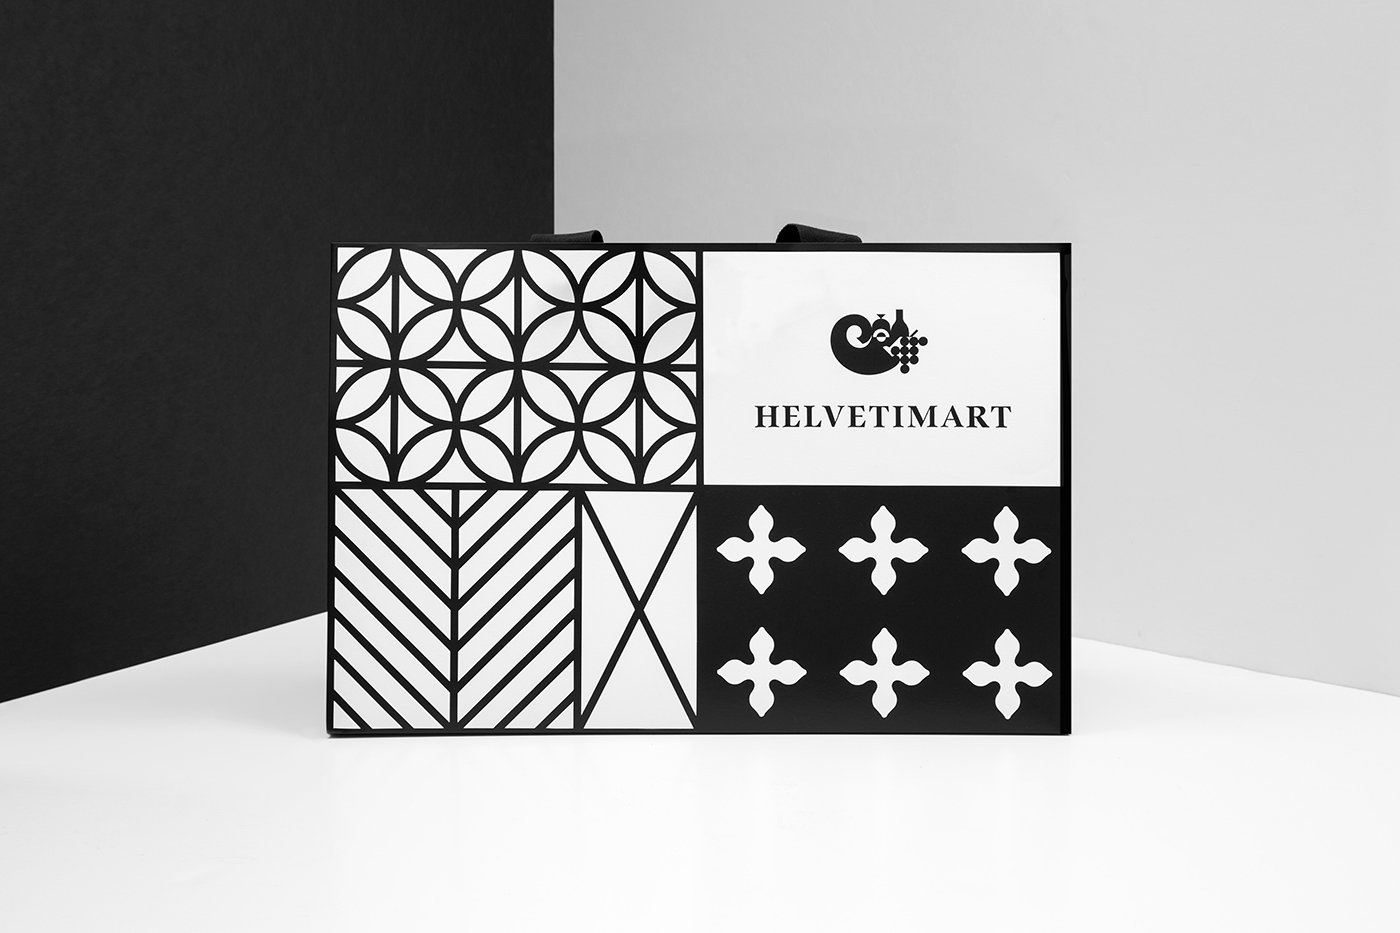 Retail Logo, Branding & Packaging – Helvetimart by Anagrama, Mexico